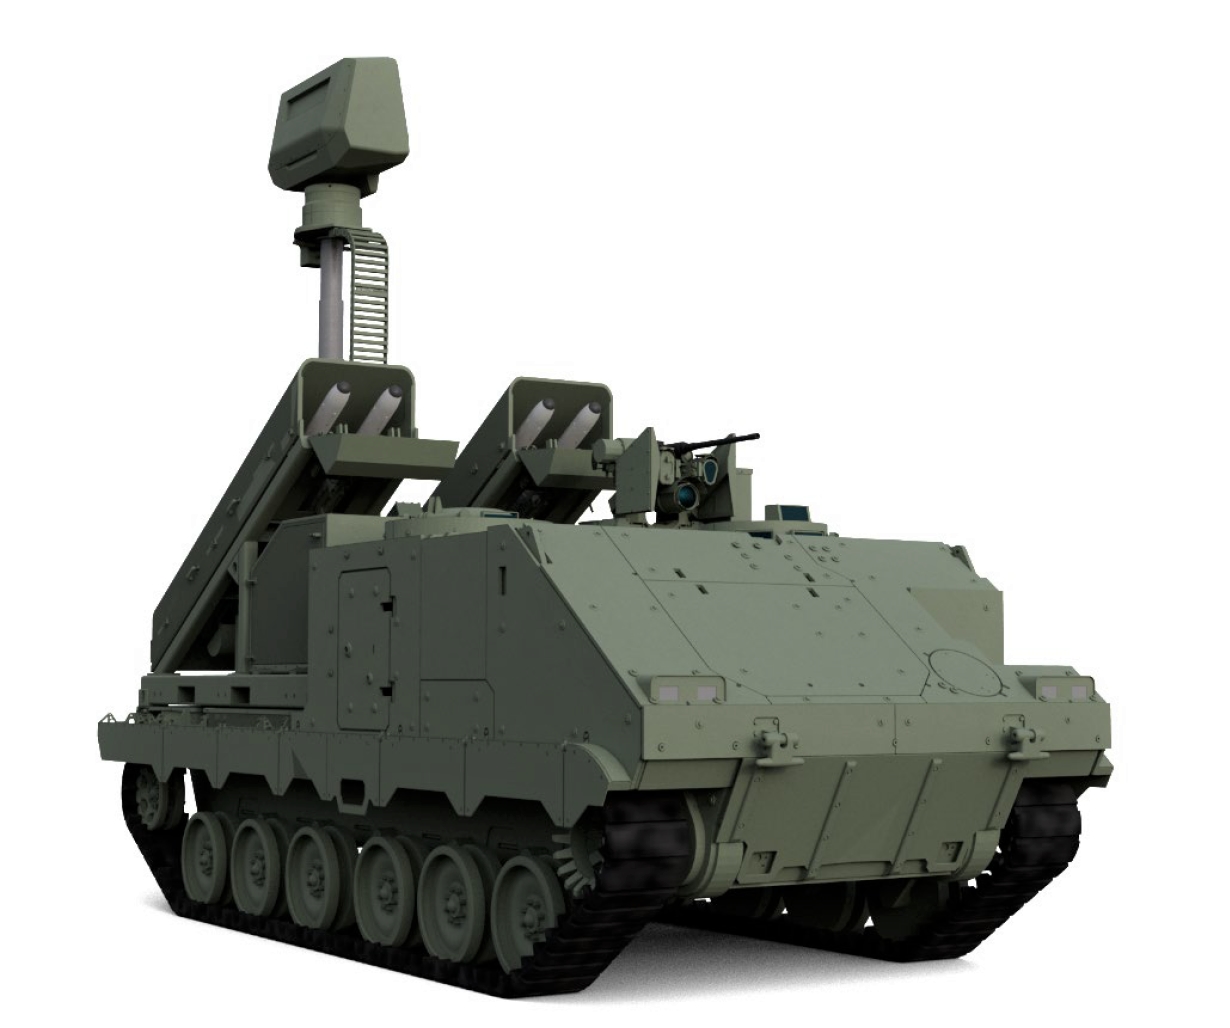 ACSV G5 in the SHORAD version